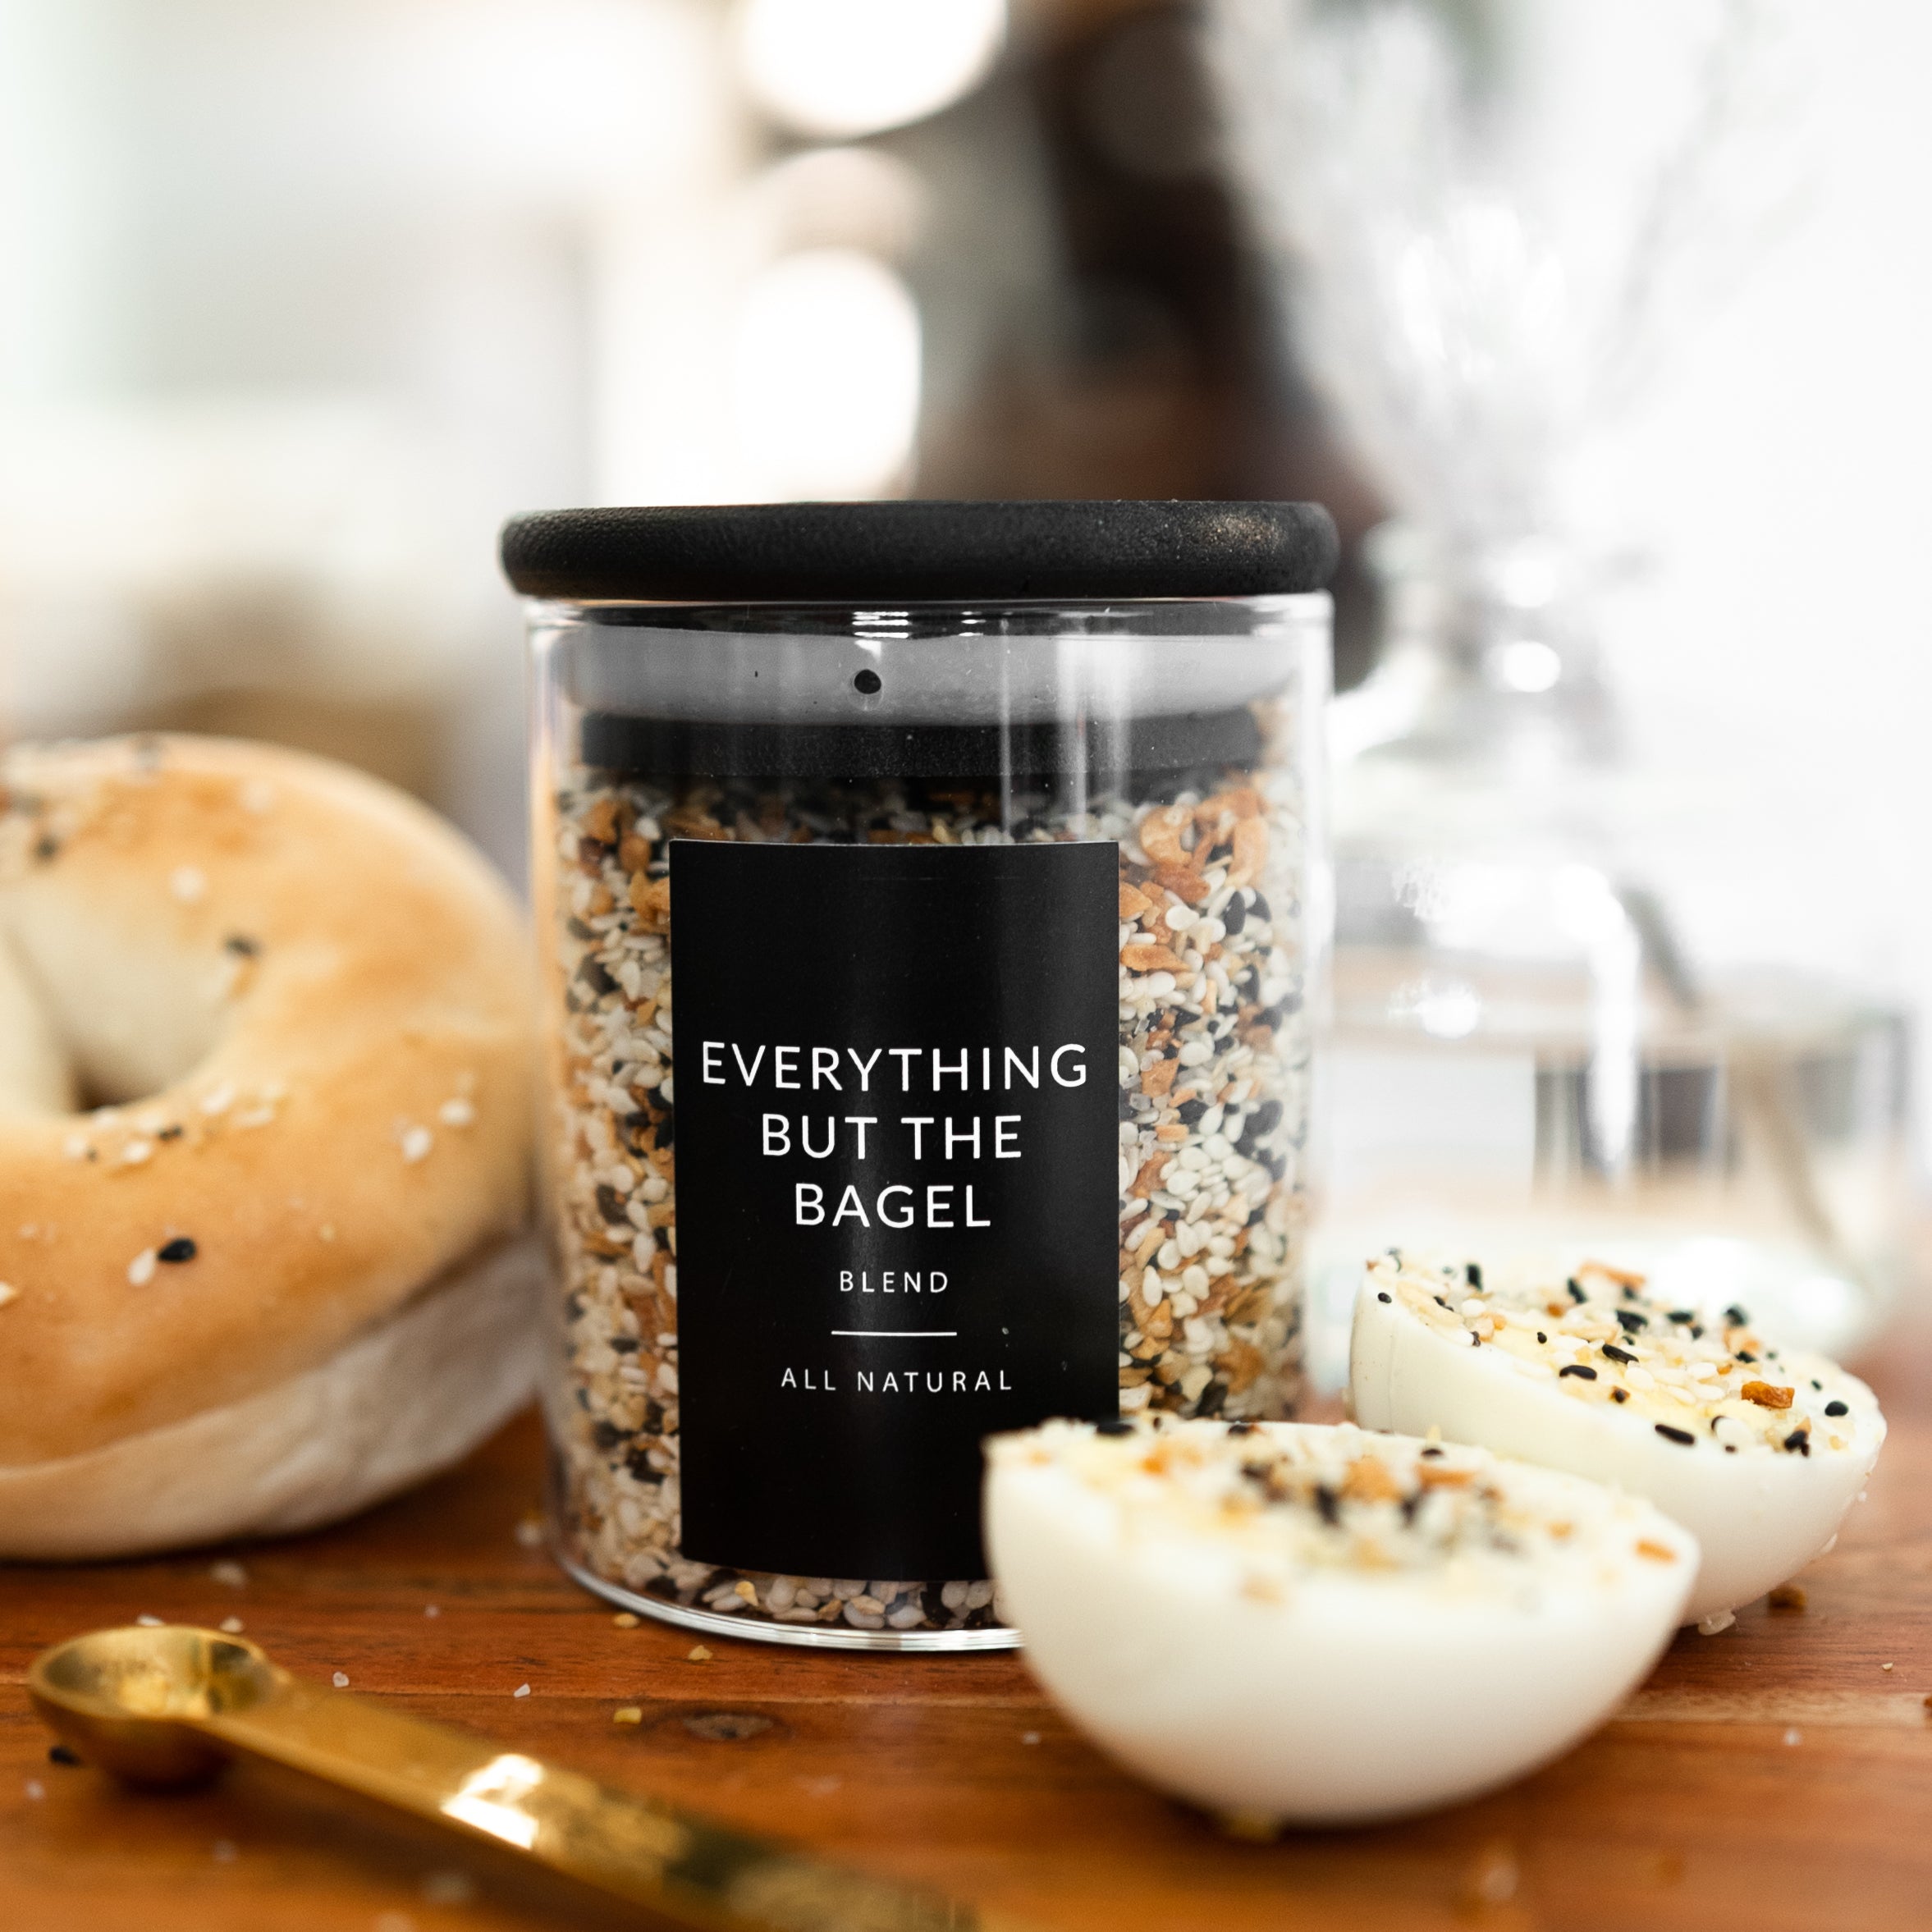 Black Minimalist Spice Label - Everything but the bagel